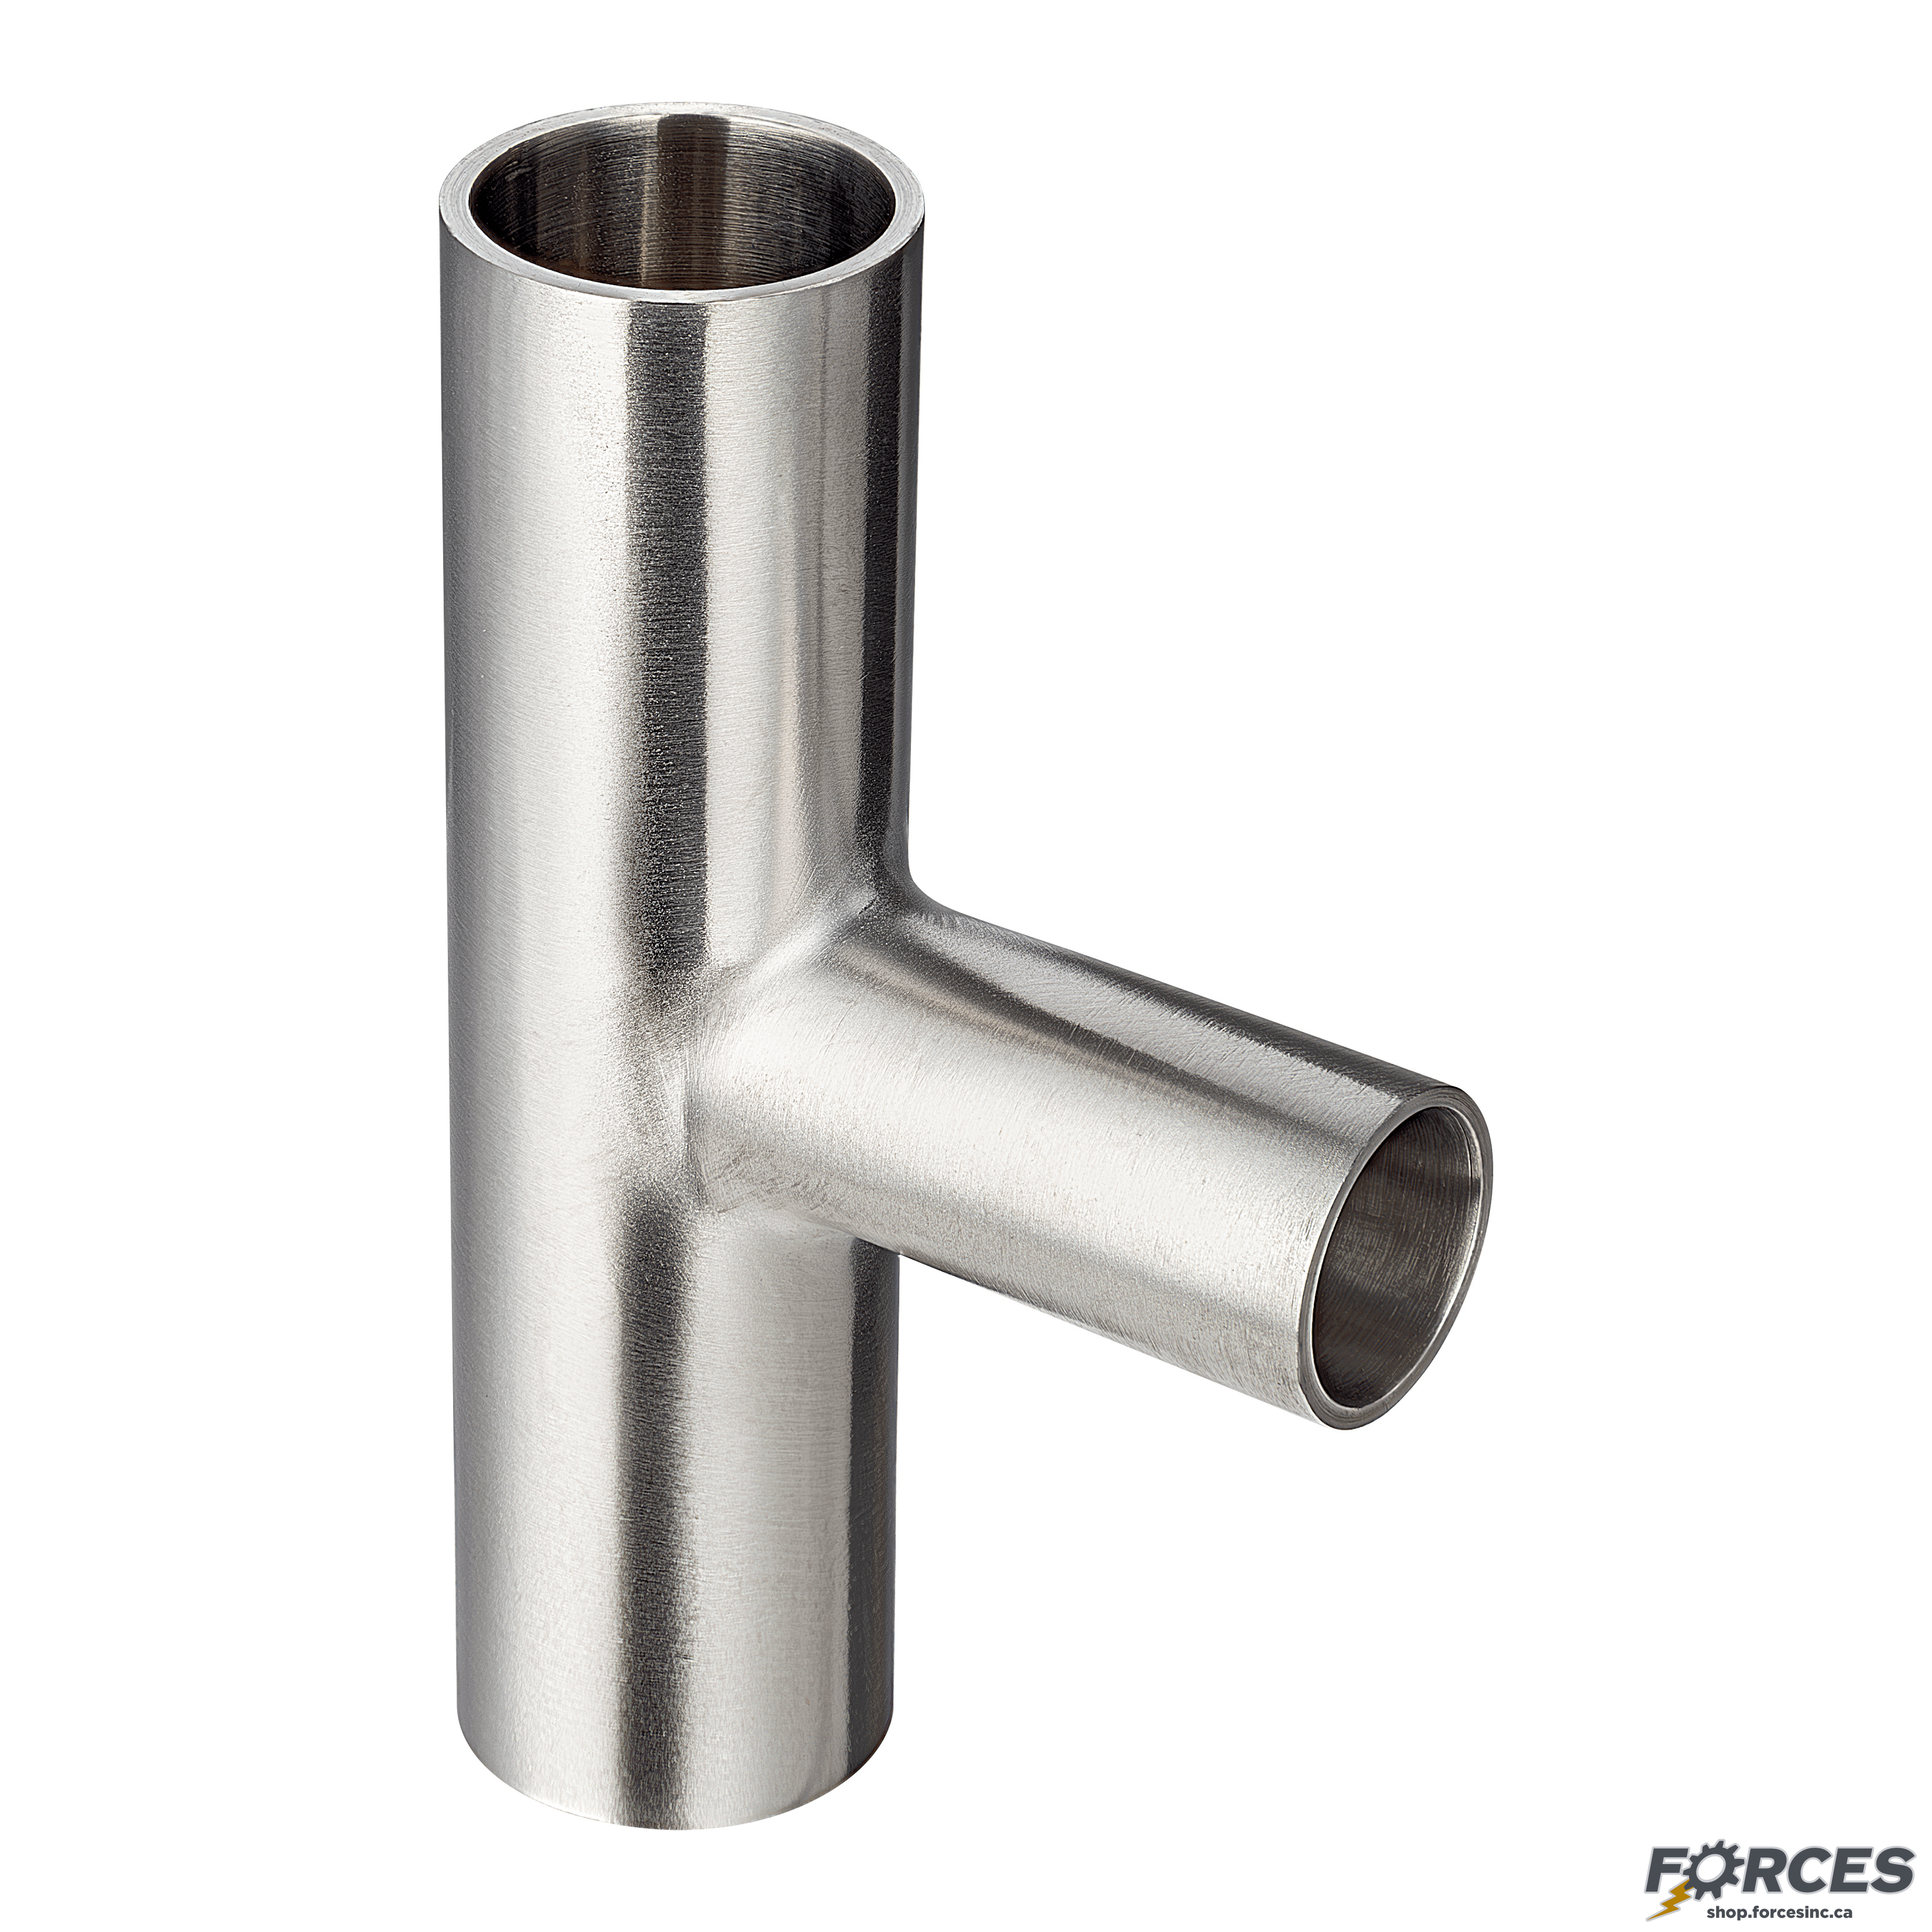 4" x 3" Butt Weld Tee Reducer - Stainless Steel 304 - Forces Inc